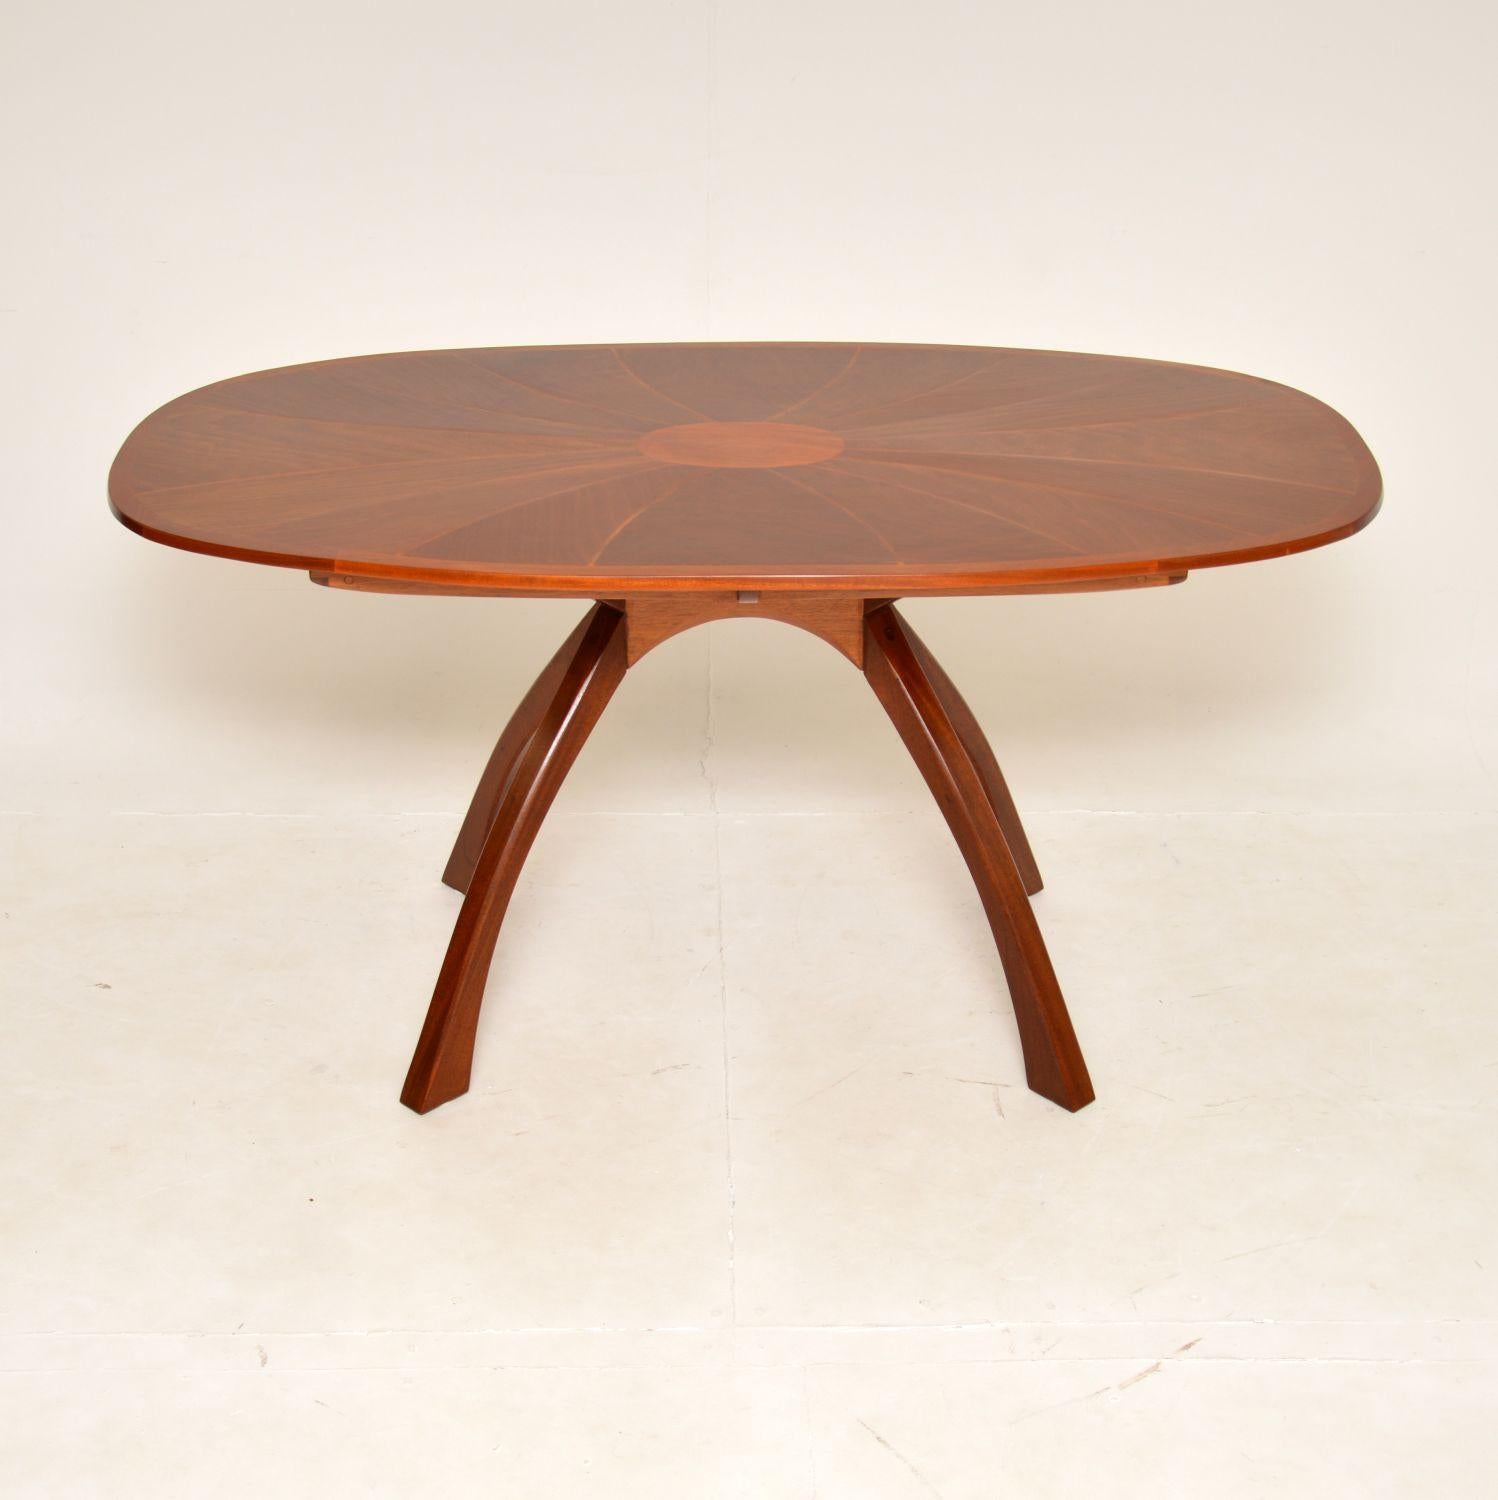 A stunning and very unusual vintage oval dining table. This was made in England, quite possibly by Heal’s, it dates from around the 1950’s.

It has a spectacular design, with beautifully inlaid walnut top sitting on a bowed spider shaped base. The